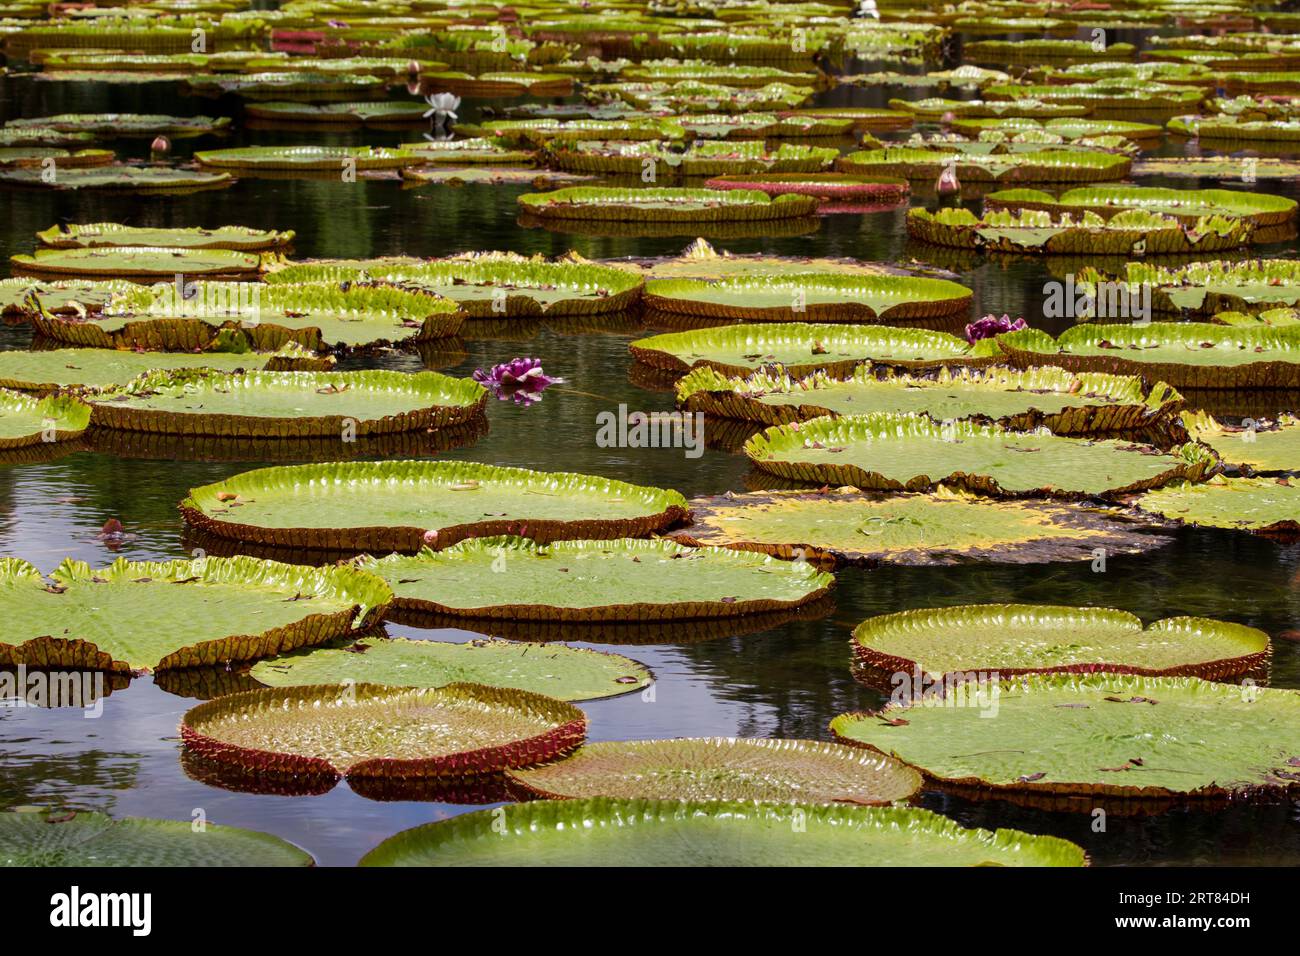 Giant water lilies in the botanical garden in Pamplemousses, Mauritius Stock Photo